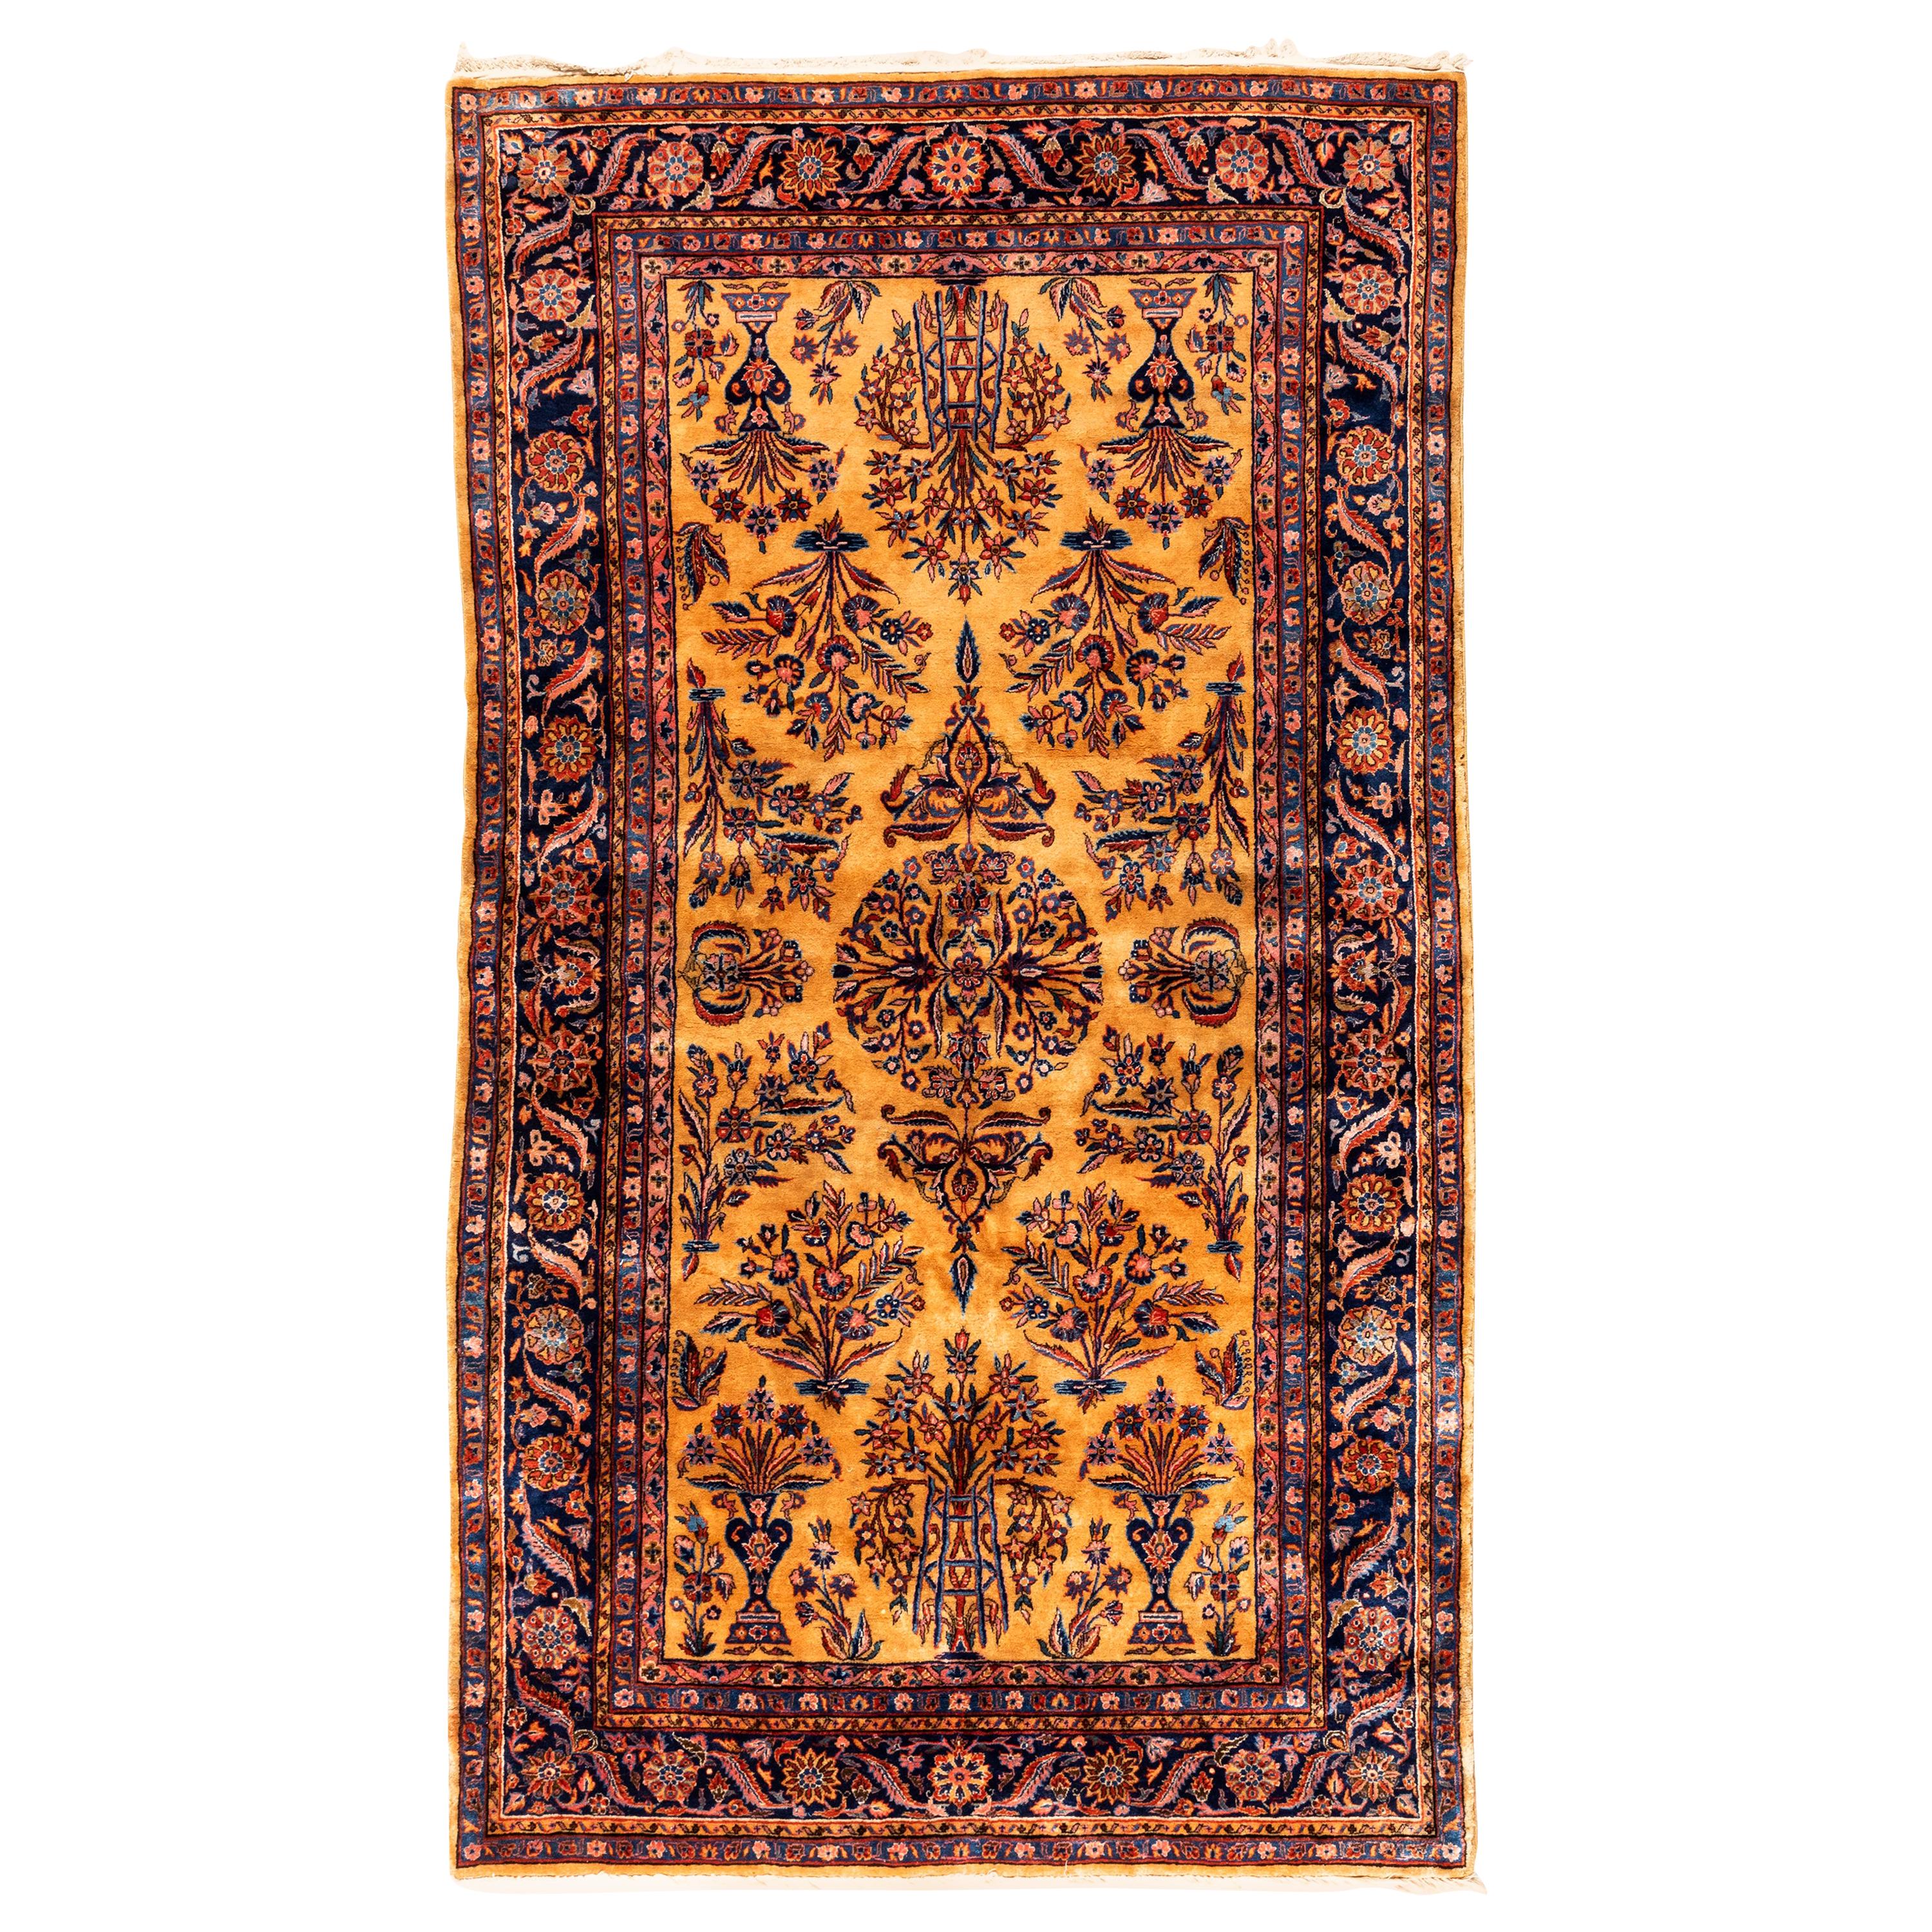 Antique Gold Navy Persian Manchester Wool Kashan Rug, circa 1880-1900 For Sale